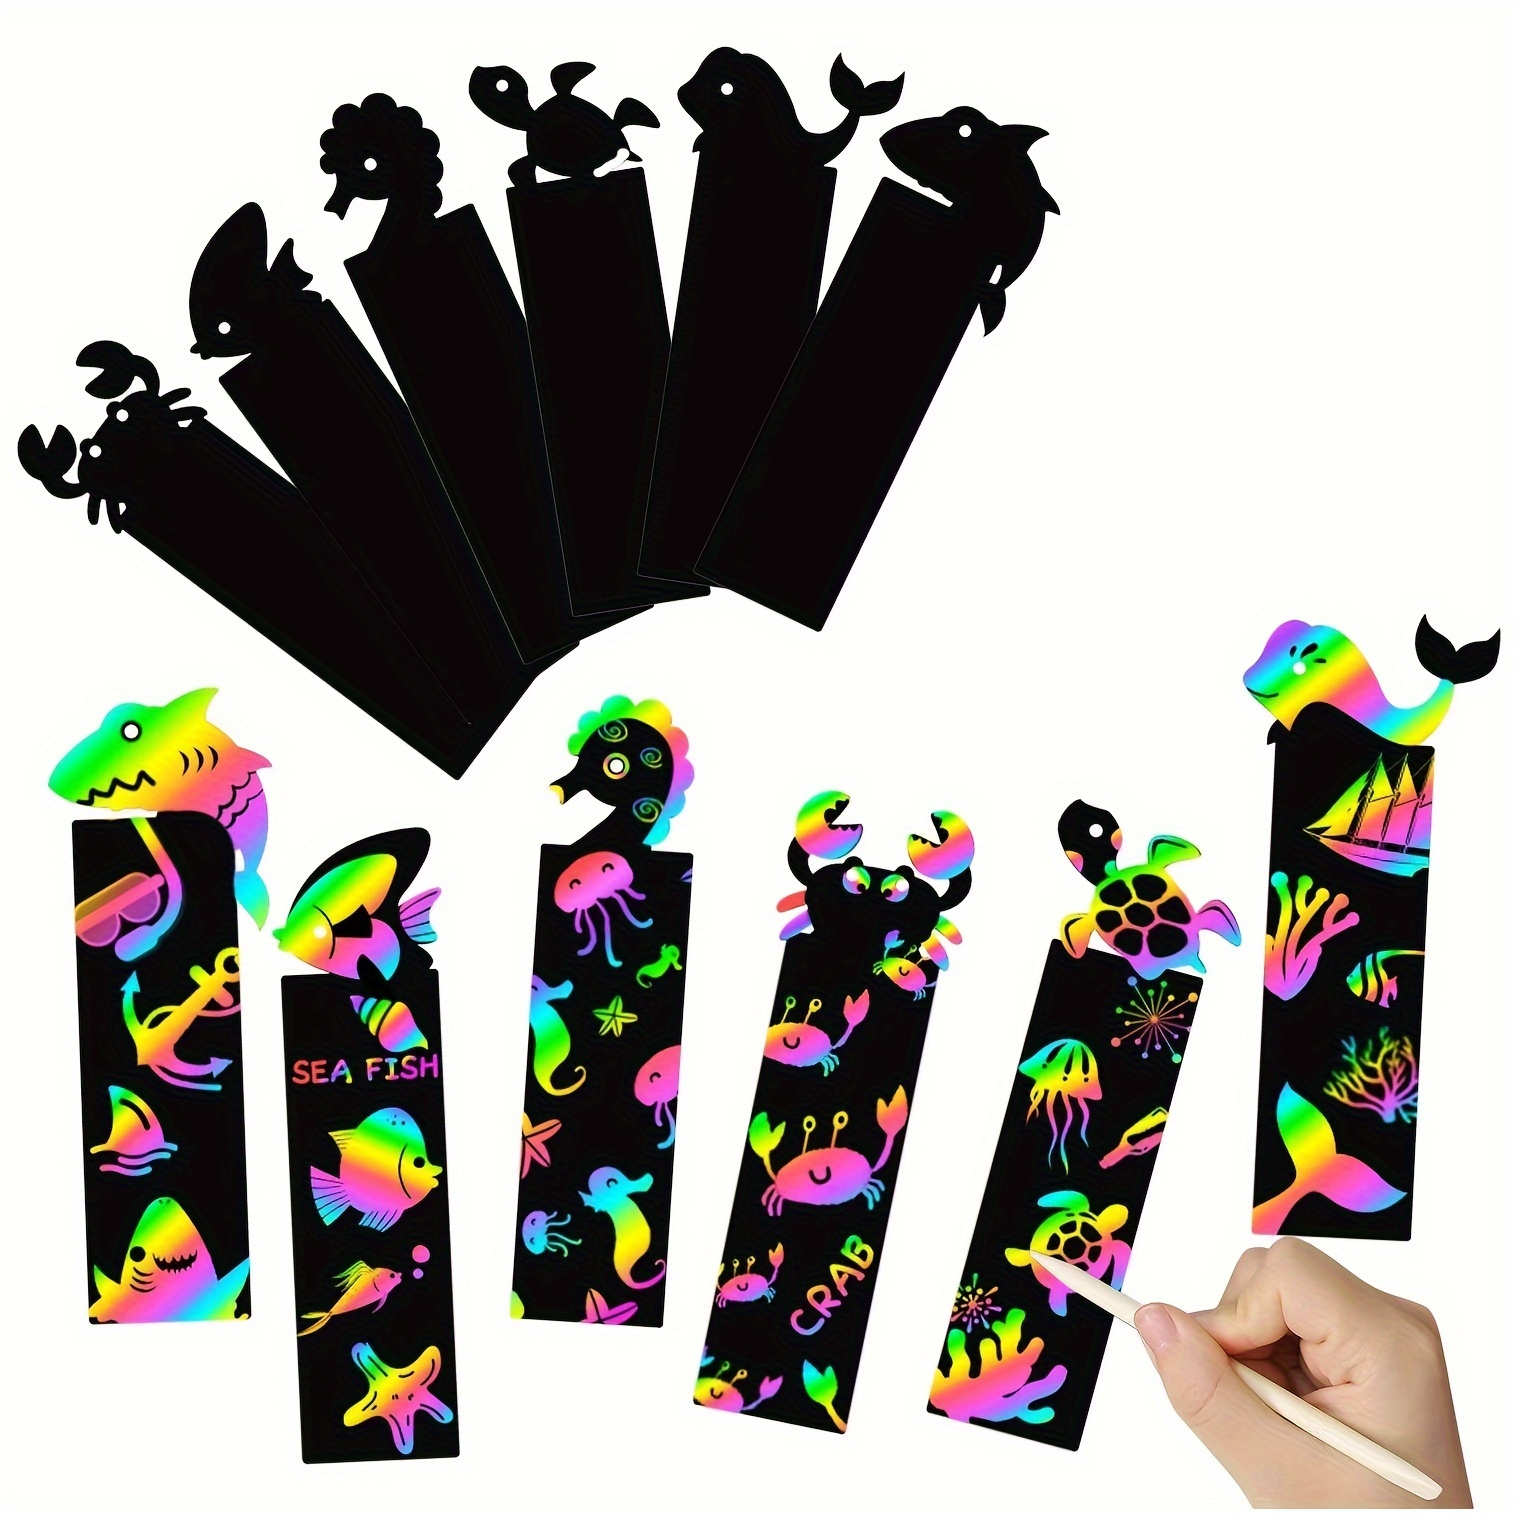 

Ocean Wonders Scratch Art Bookmarks Kit - 48pcs Sea Creatures With Styluses & Colorful Ribbons, Diy Craft Set For School, Home, Travel Fun - Perfect For Halloween, Christmas, Easter, Birthday Gifts